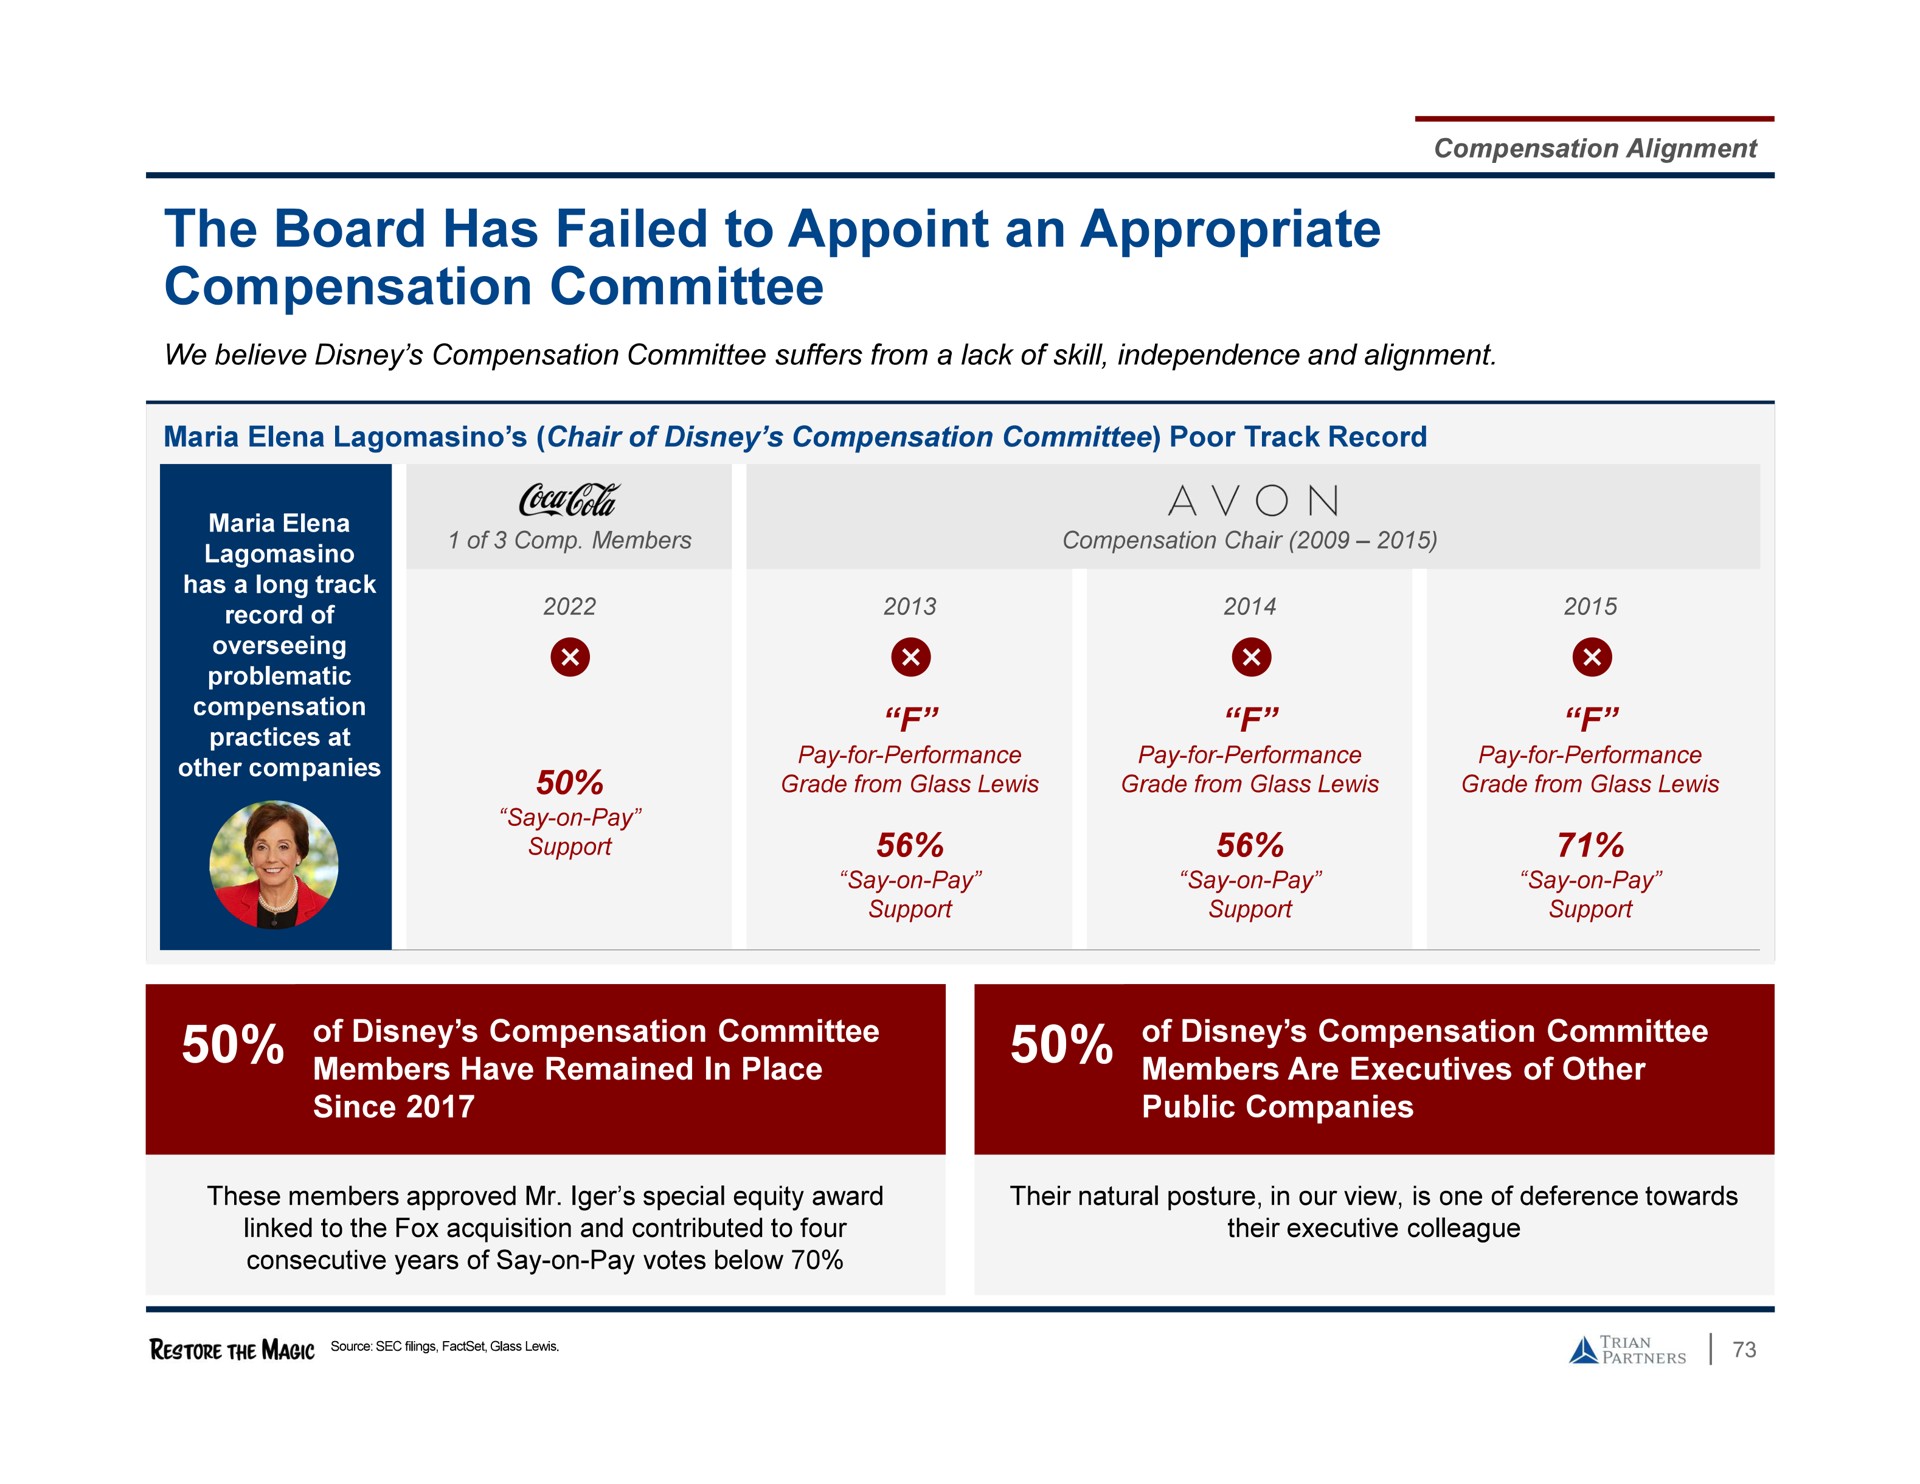 the board has failed to appoint an appropriate compensation committee | Trian Partners